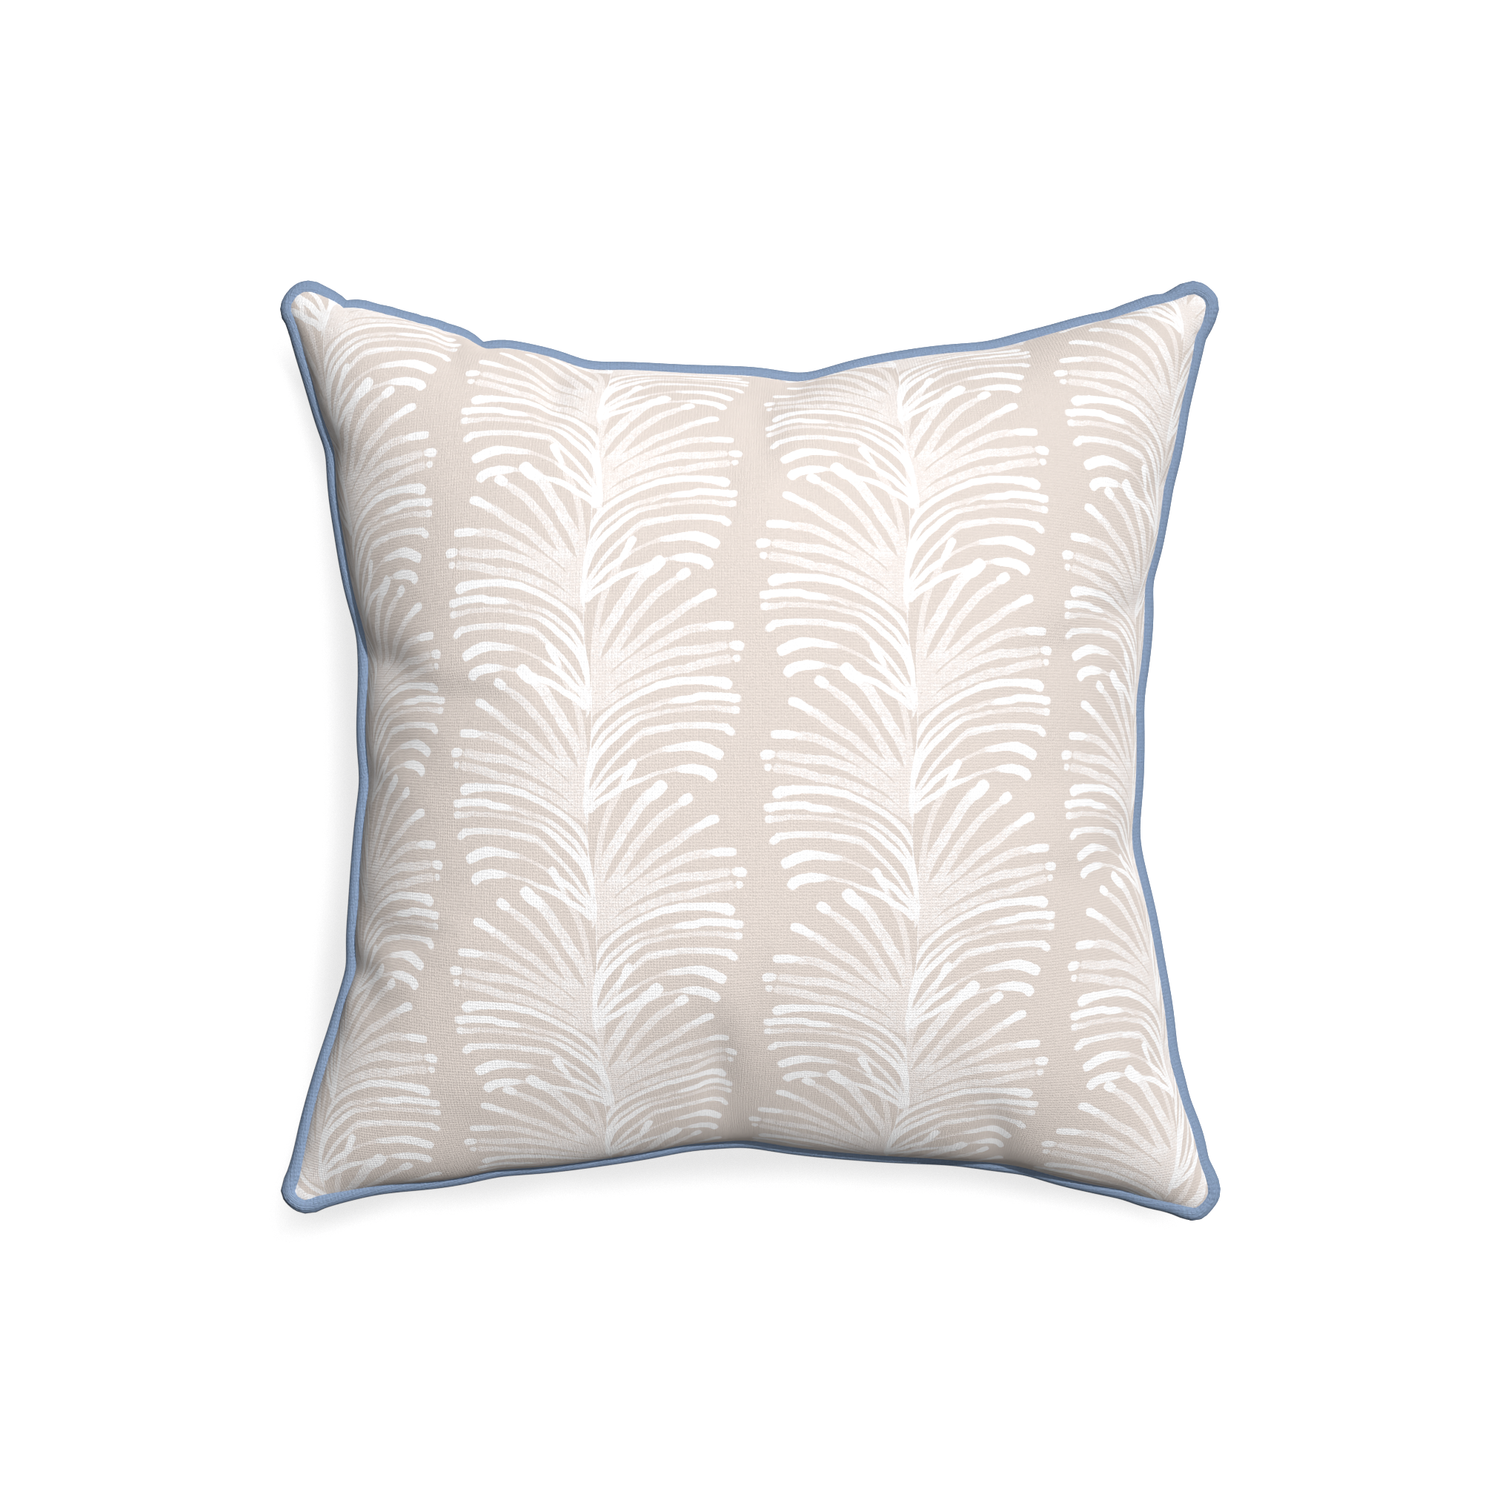 20-square emma sand custom sand colored botanical stripepillow with sky piping on white background